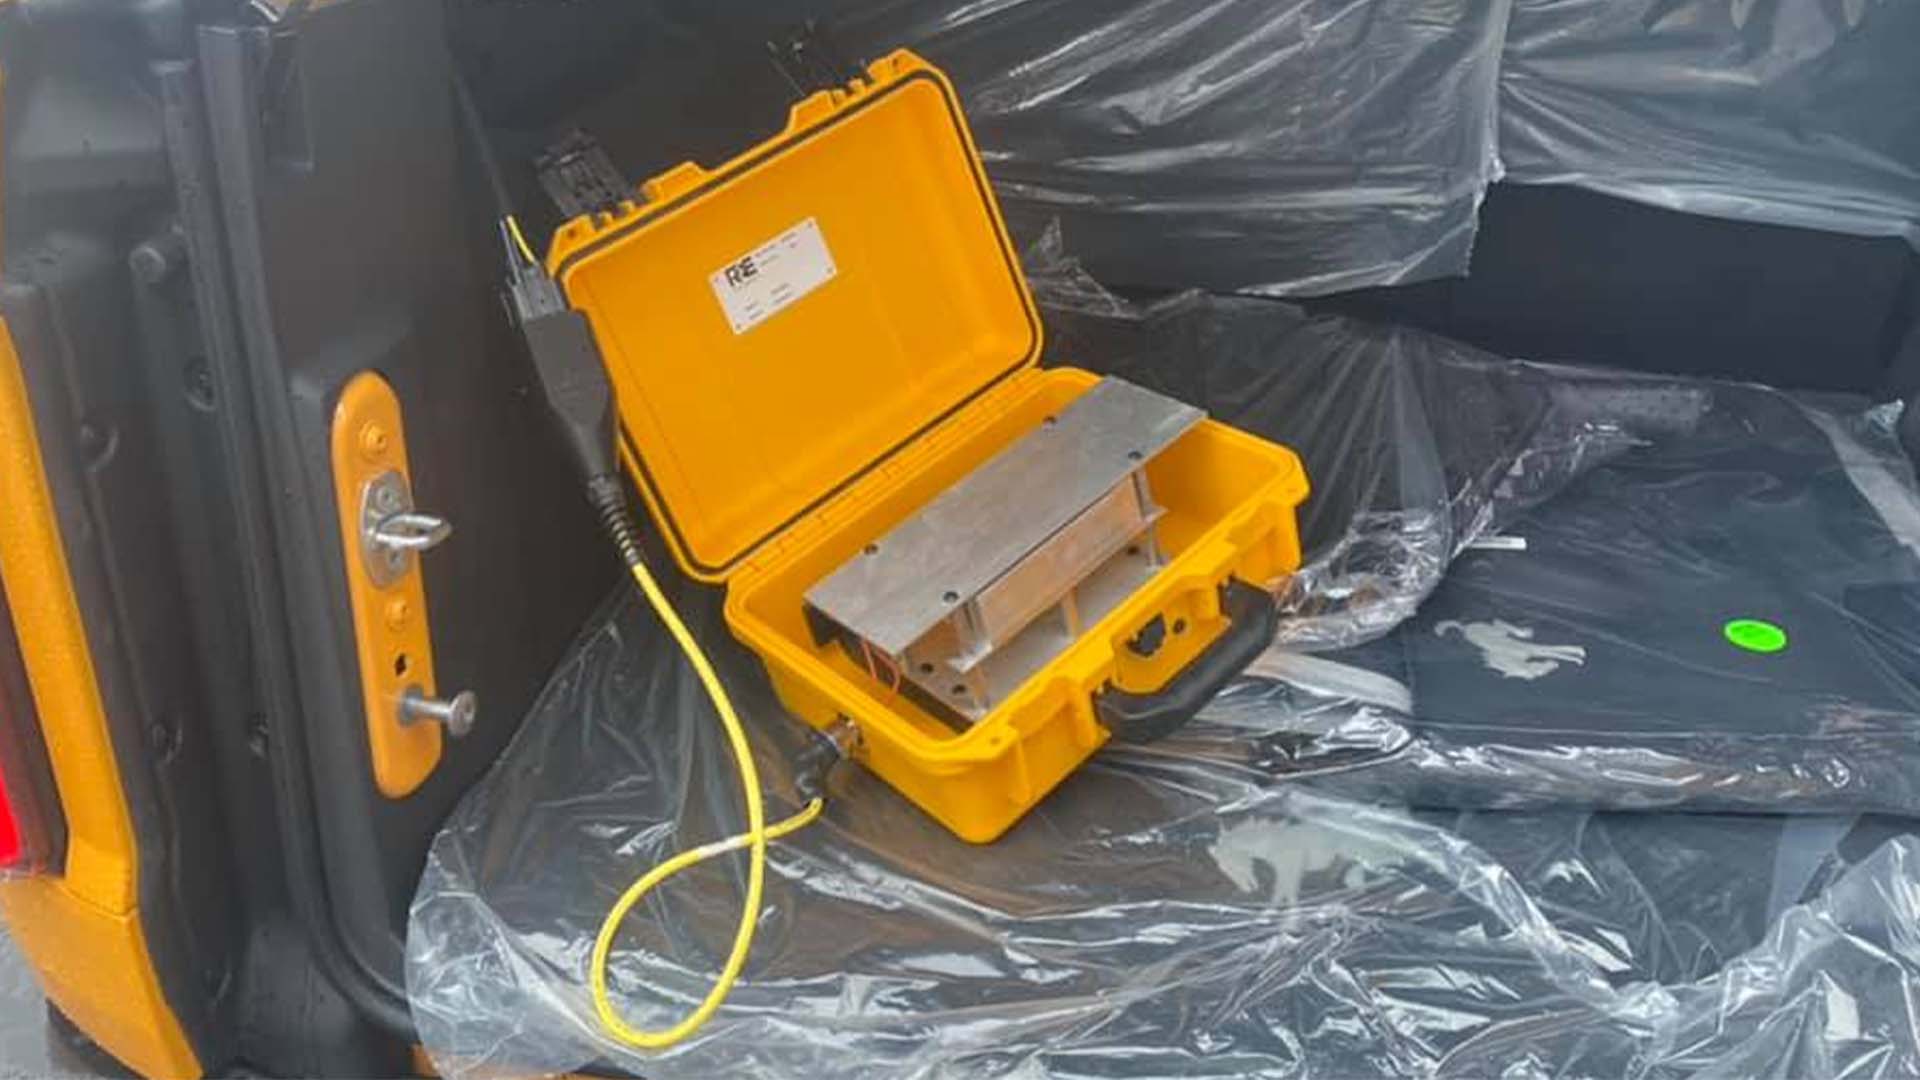 A Canadian Ford dealership found a surprise in the trunk of a 2021 Ford Bronco that was recently delivered to its showroom. This mystery box plugged i